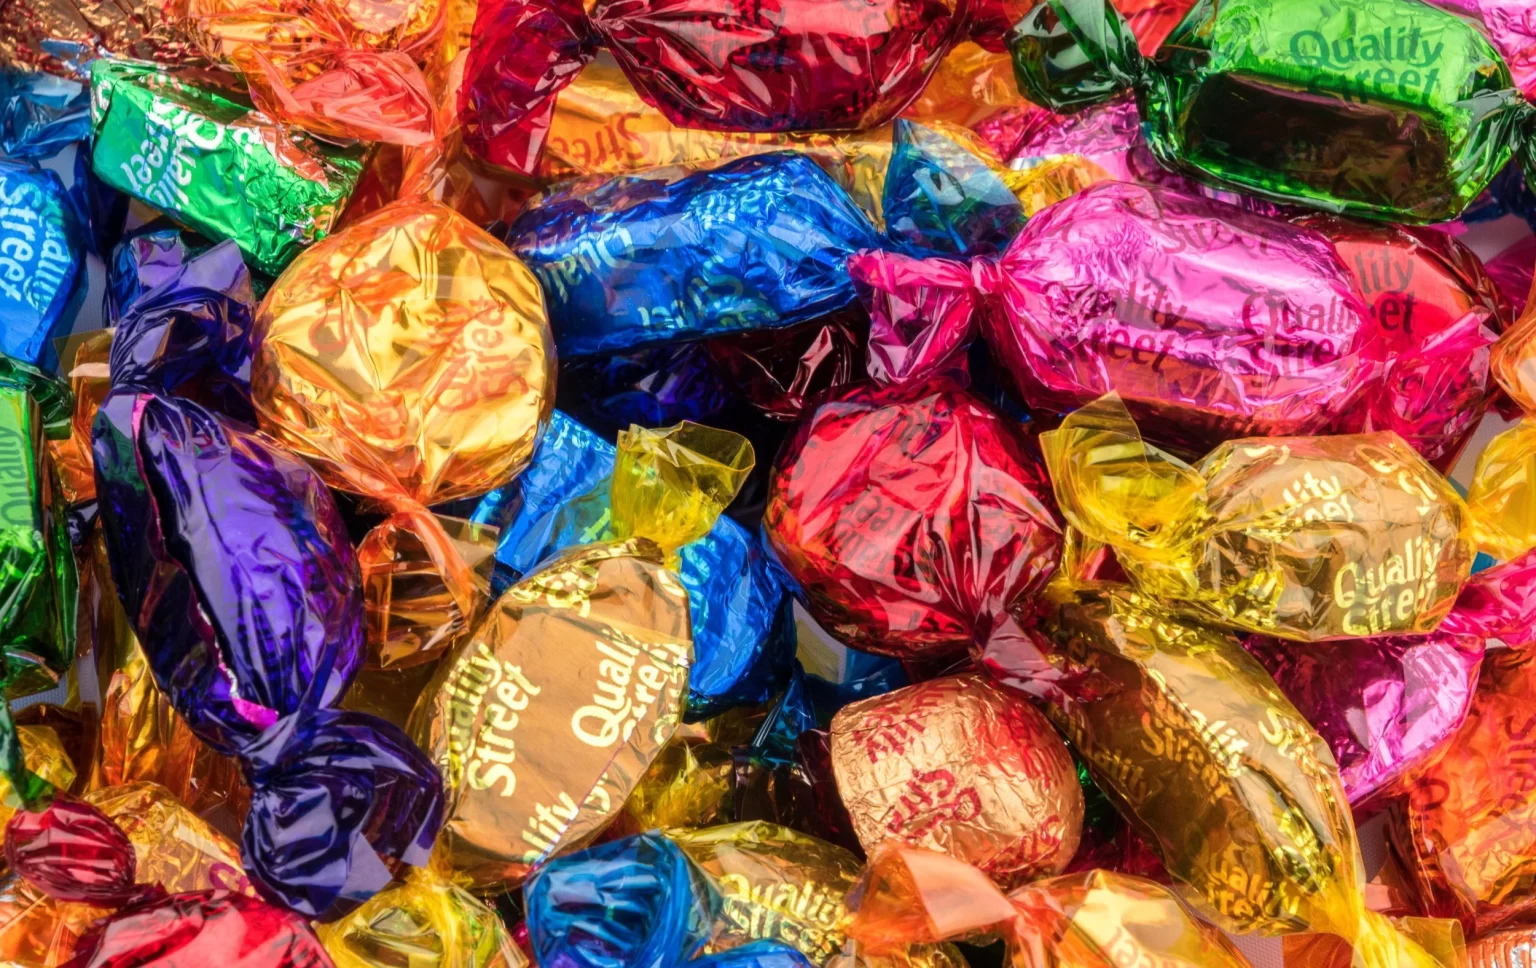 Quality Street ditch famous bright plastic wrappers to be more eco-friendly